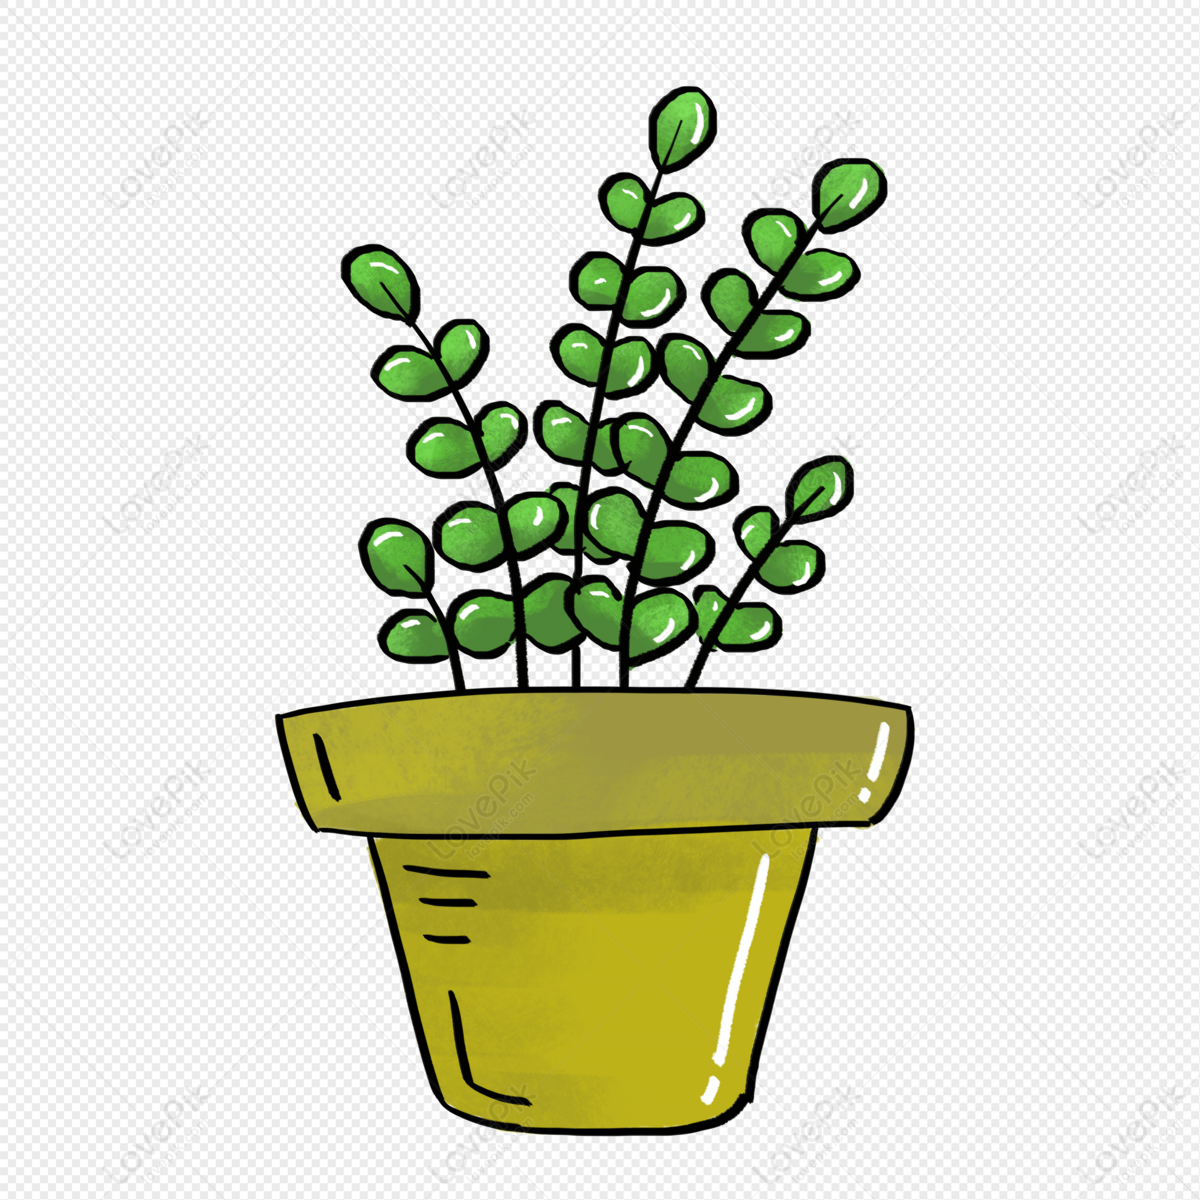 Hand Painted Cartoon Plant Potted Free Material PNG Hd Transparent Image  And Clipart Image For Free Download - Lovepik | 401370674